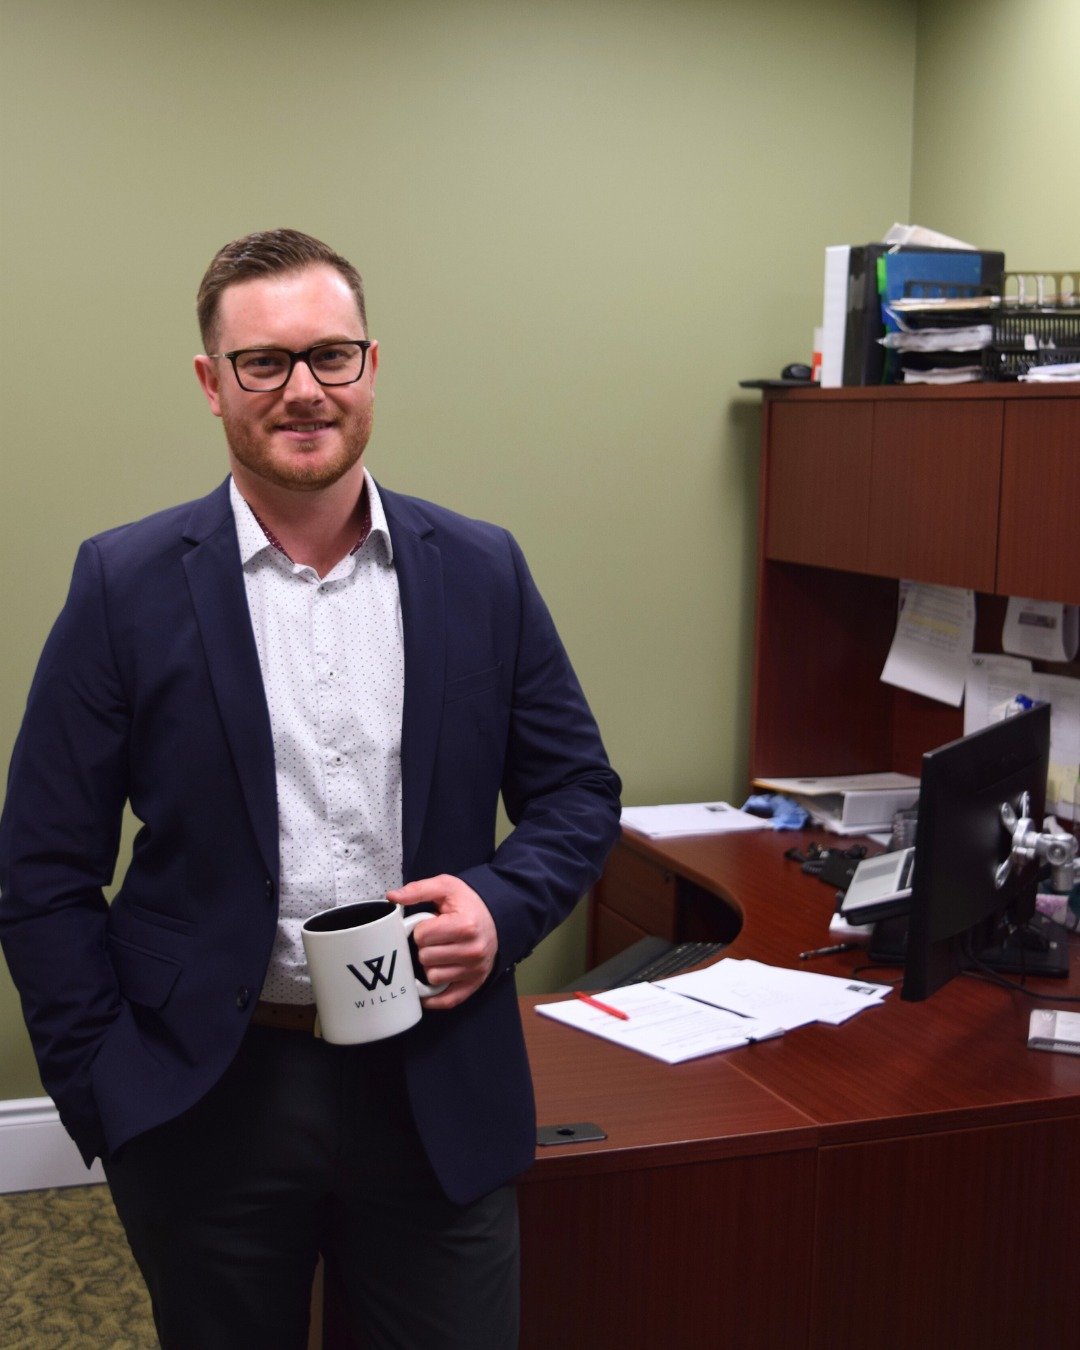 Meet our Controller, Kory O'Brien 👋 Kory was recently promoted to the role of Controller, overseeing the Accounting team and everything accounting at Wills. 

Kory brings strategic guidance to the future of Wills and is integral to the day-to-day op